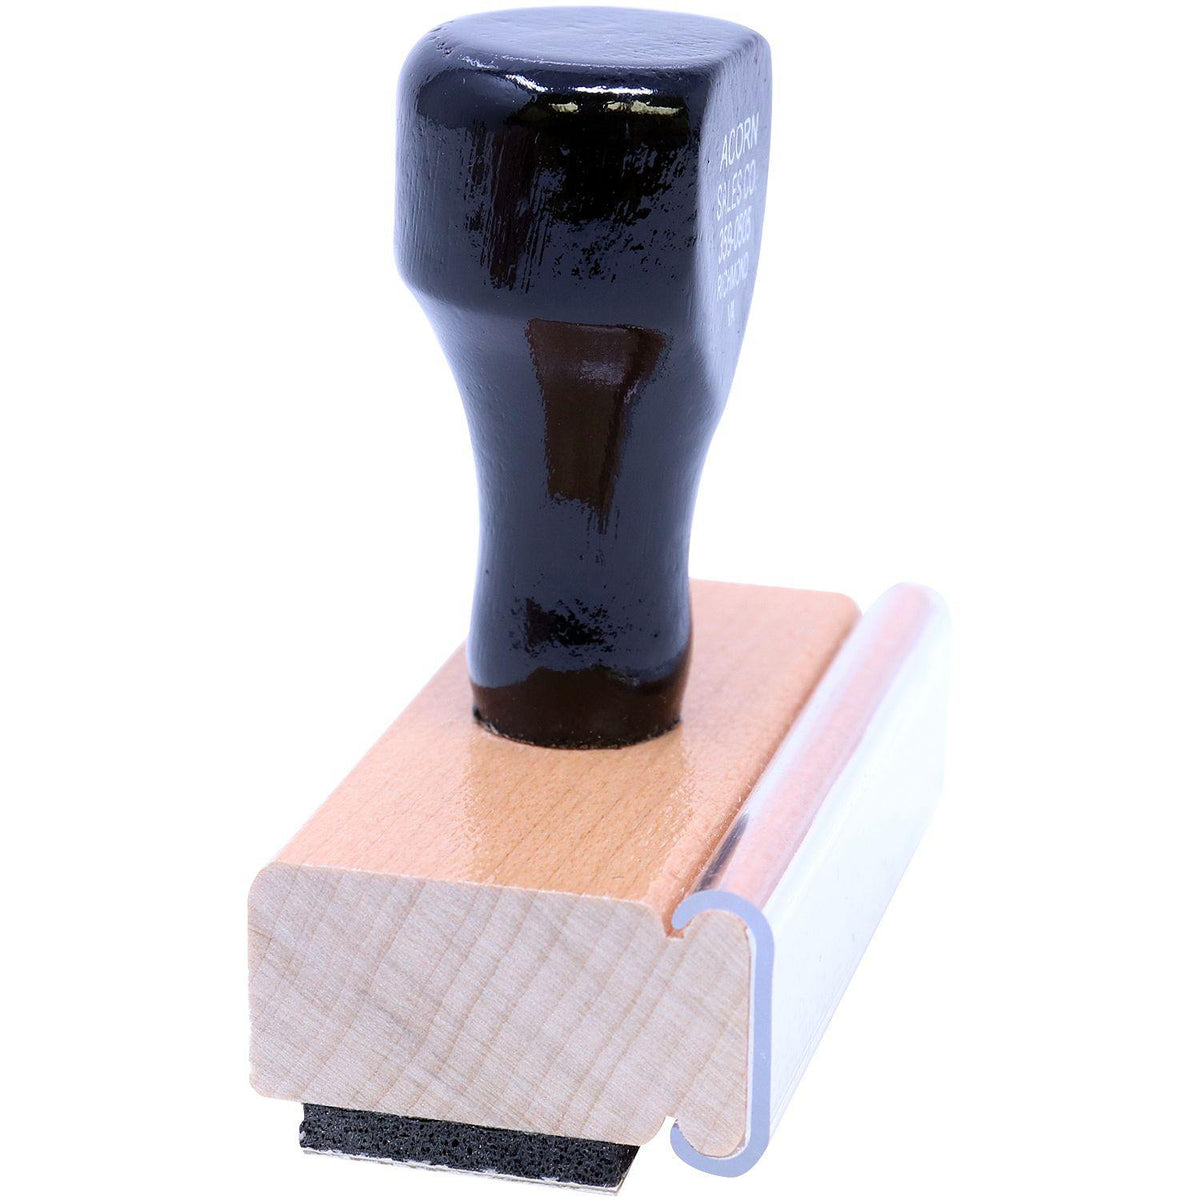 Side View of Curley Past Due Rubber Stamp at an Angle